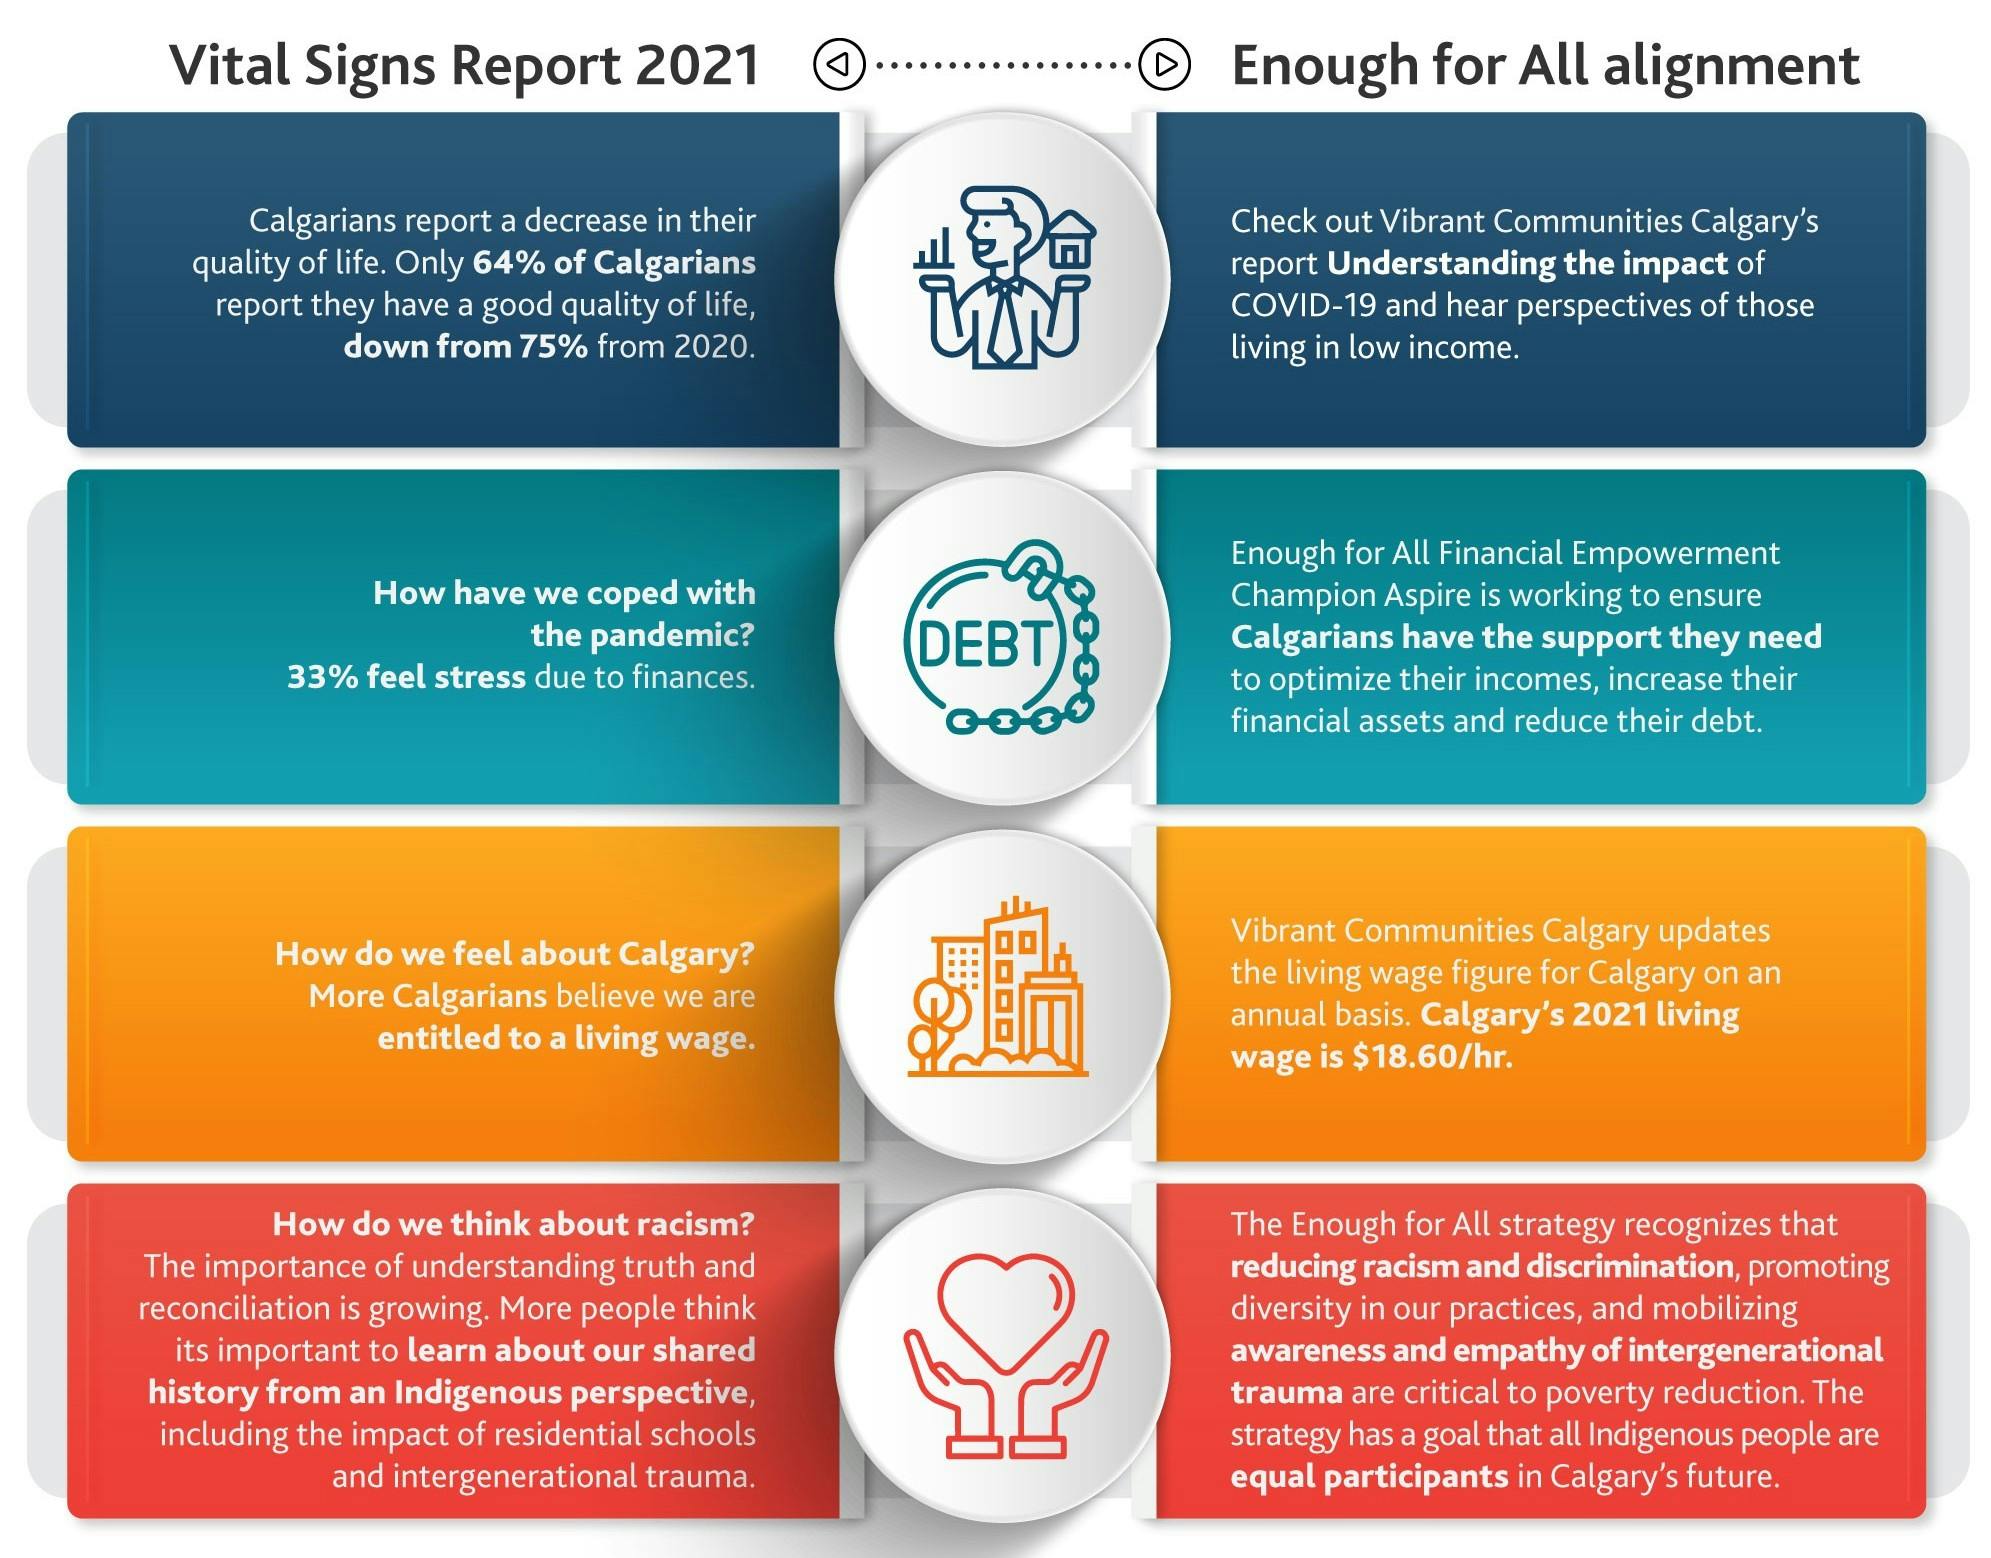 Infographic with Vital Signs parallels with Enough for All